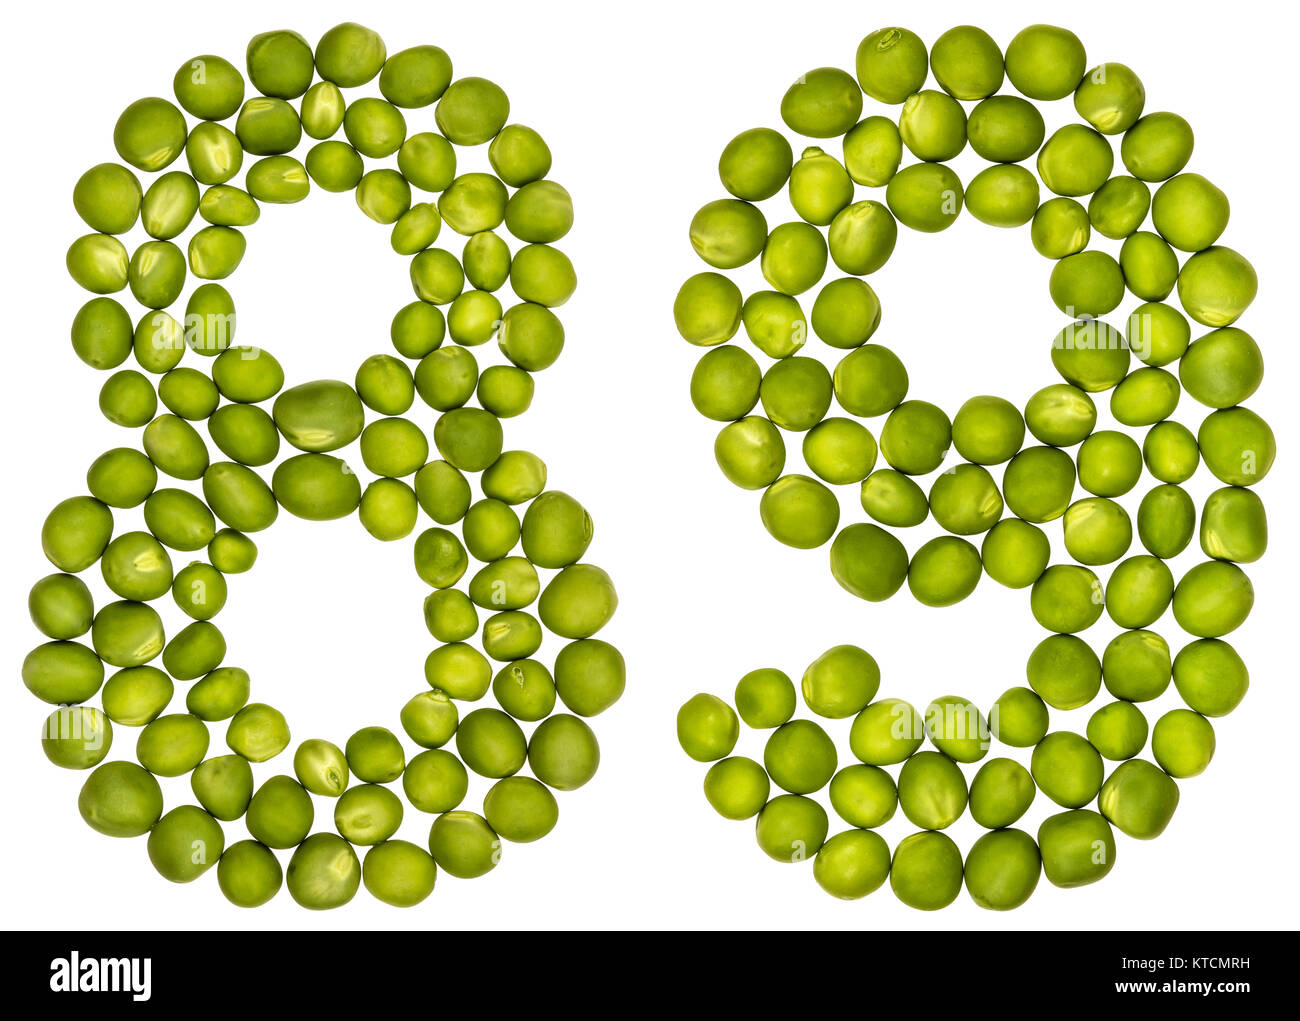 Arabic numeral 89, eighty nine, from green peas, isolated on white background Stock Photo